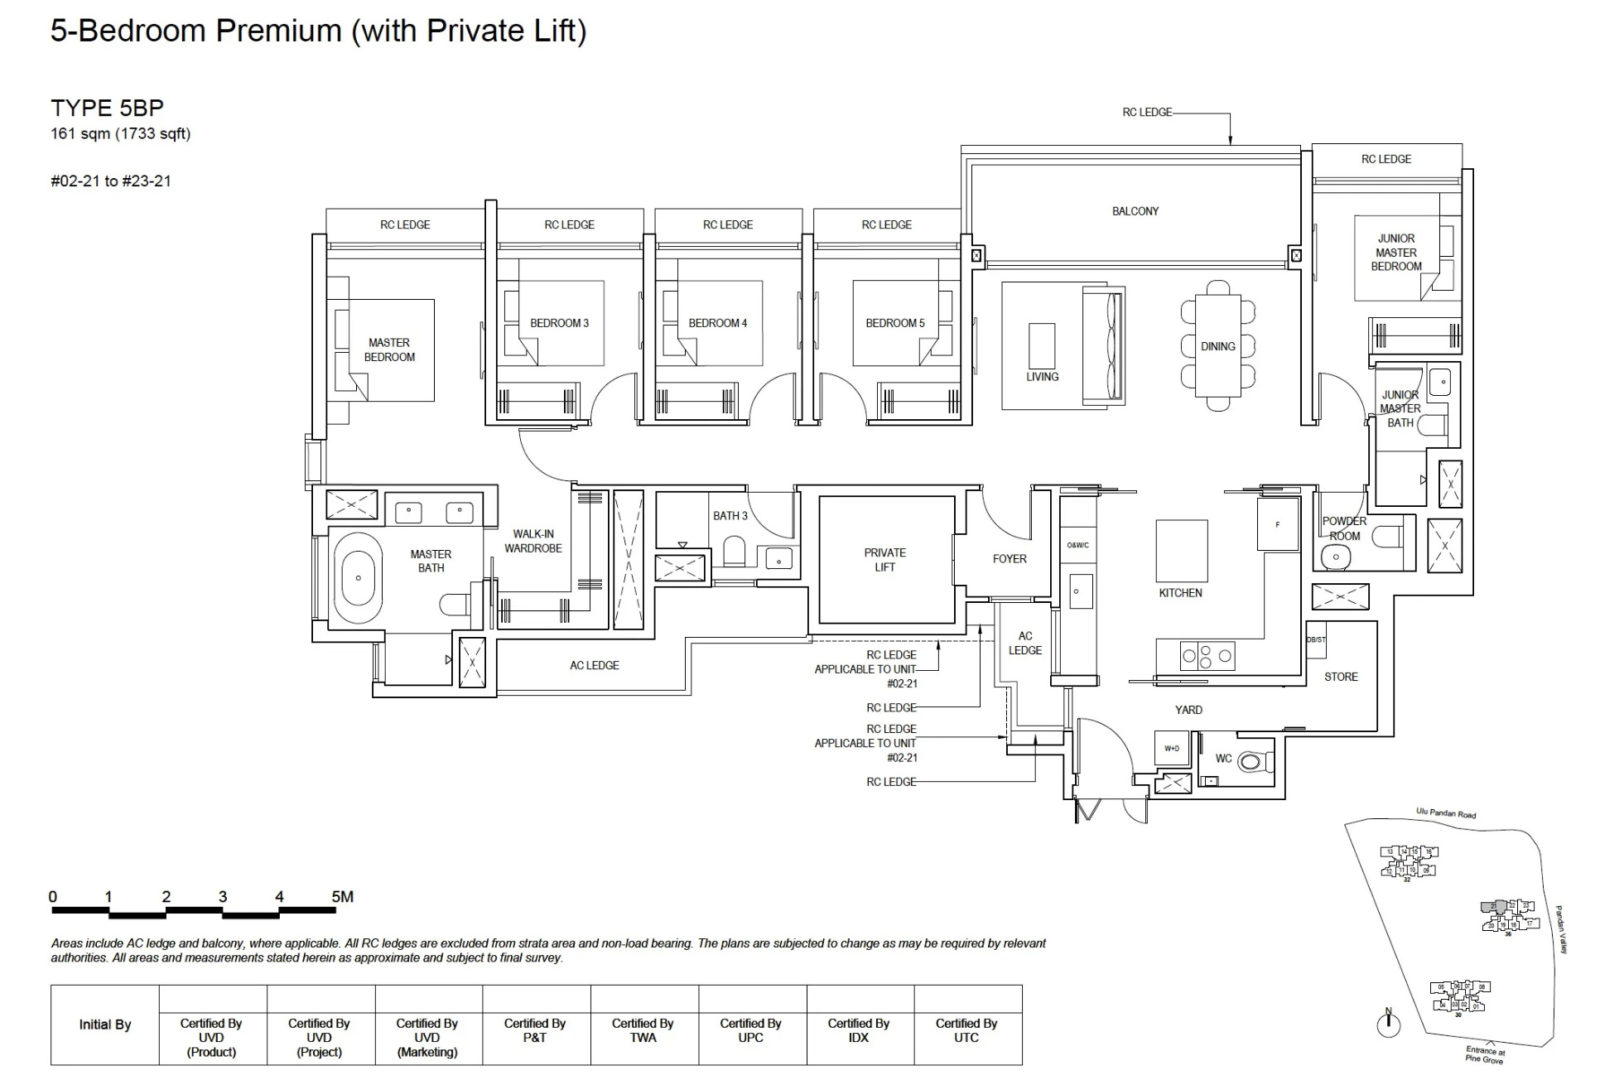 pinetree hill 5 bedroom 1 layout